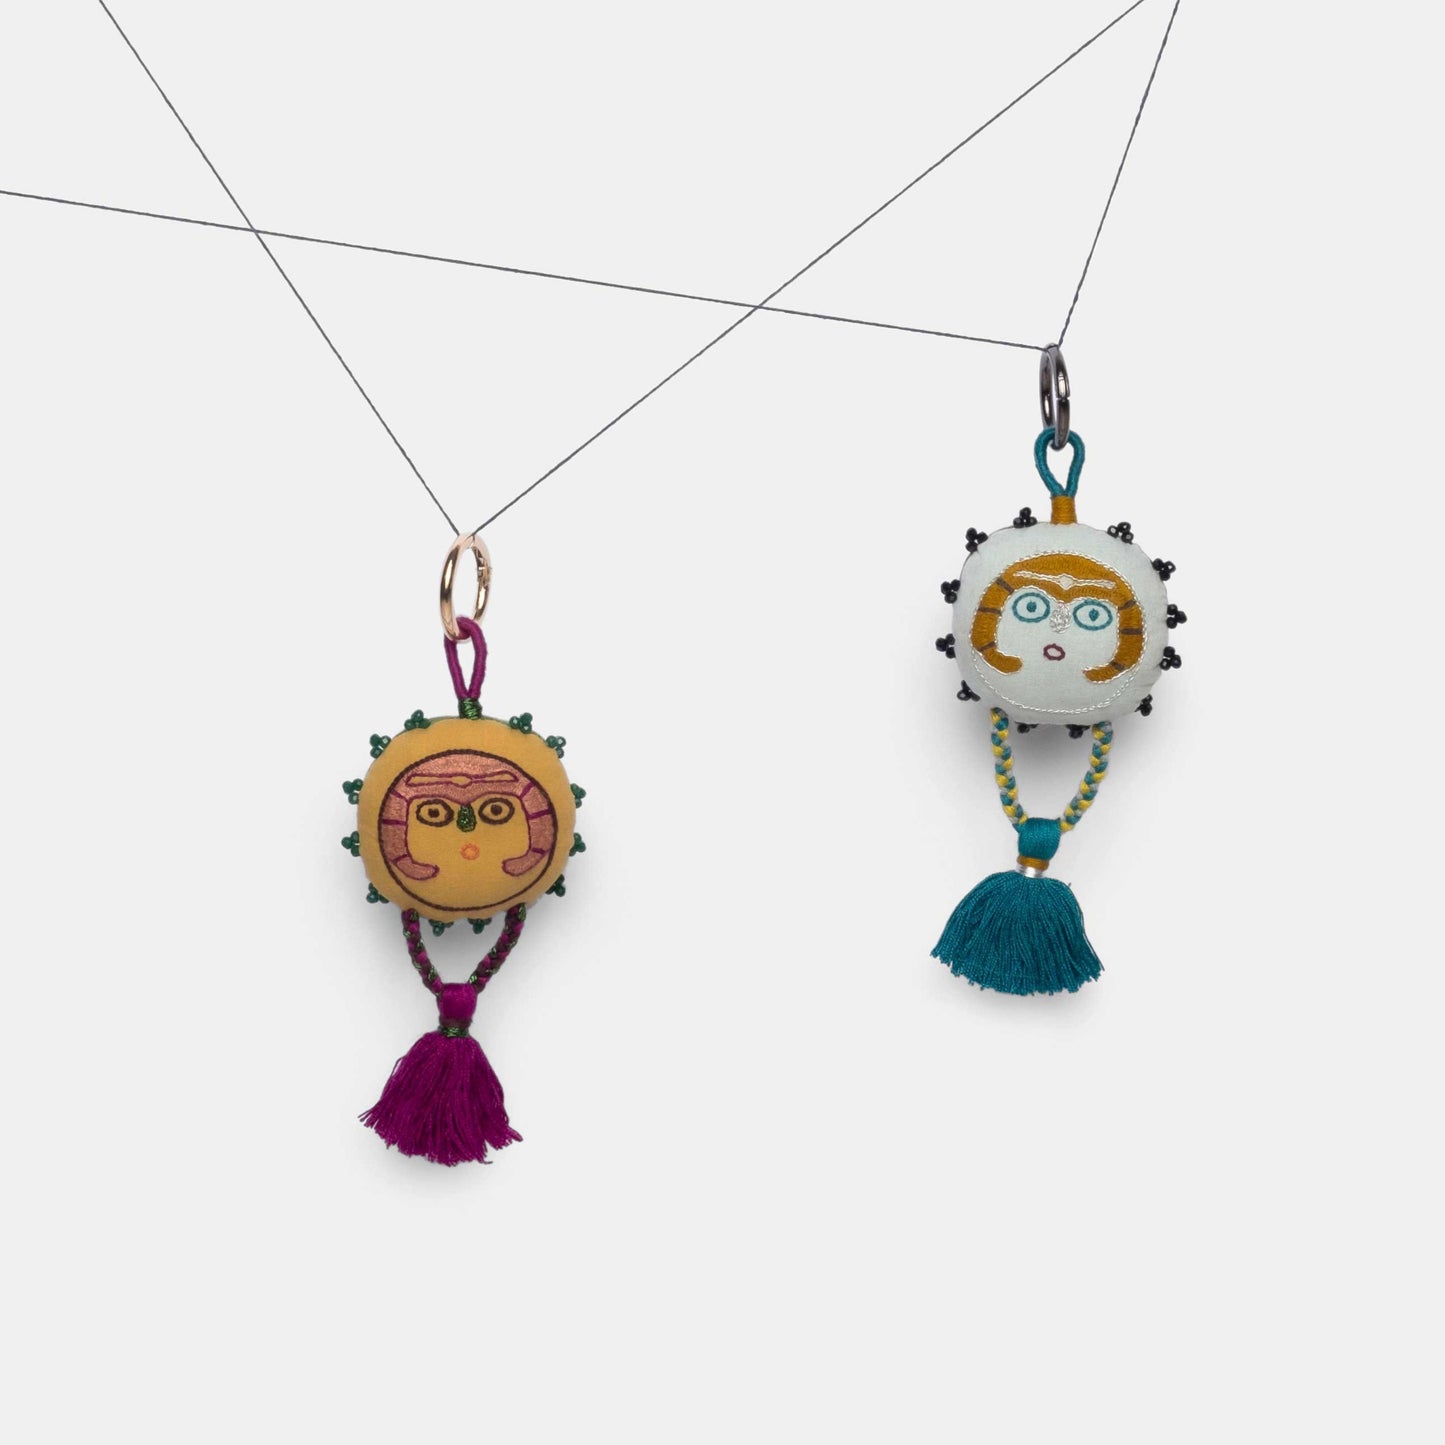 Mustard and Silver Sky Sun Lady charms hanging from a thread